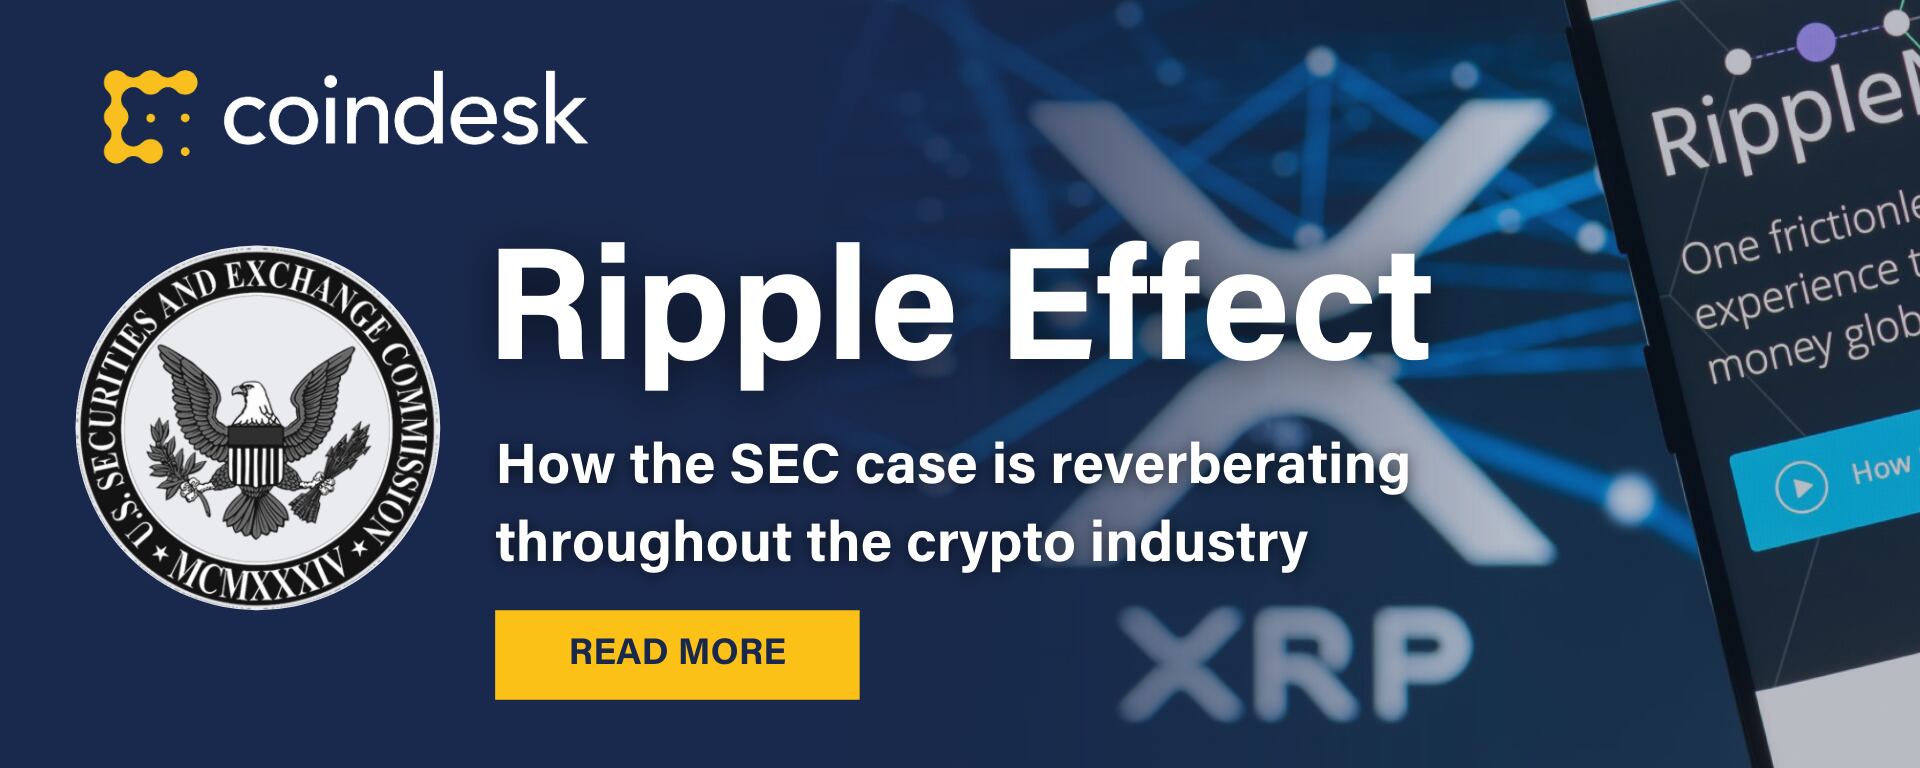 Ripple Says Over-The-Counter XRP Sales Soared 1,700% to $33 Million in Q2 –  Altcoins Bitcoin News